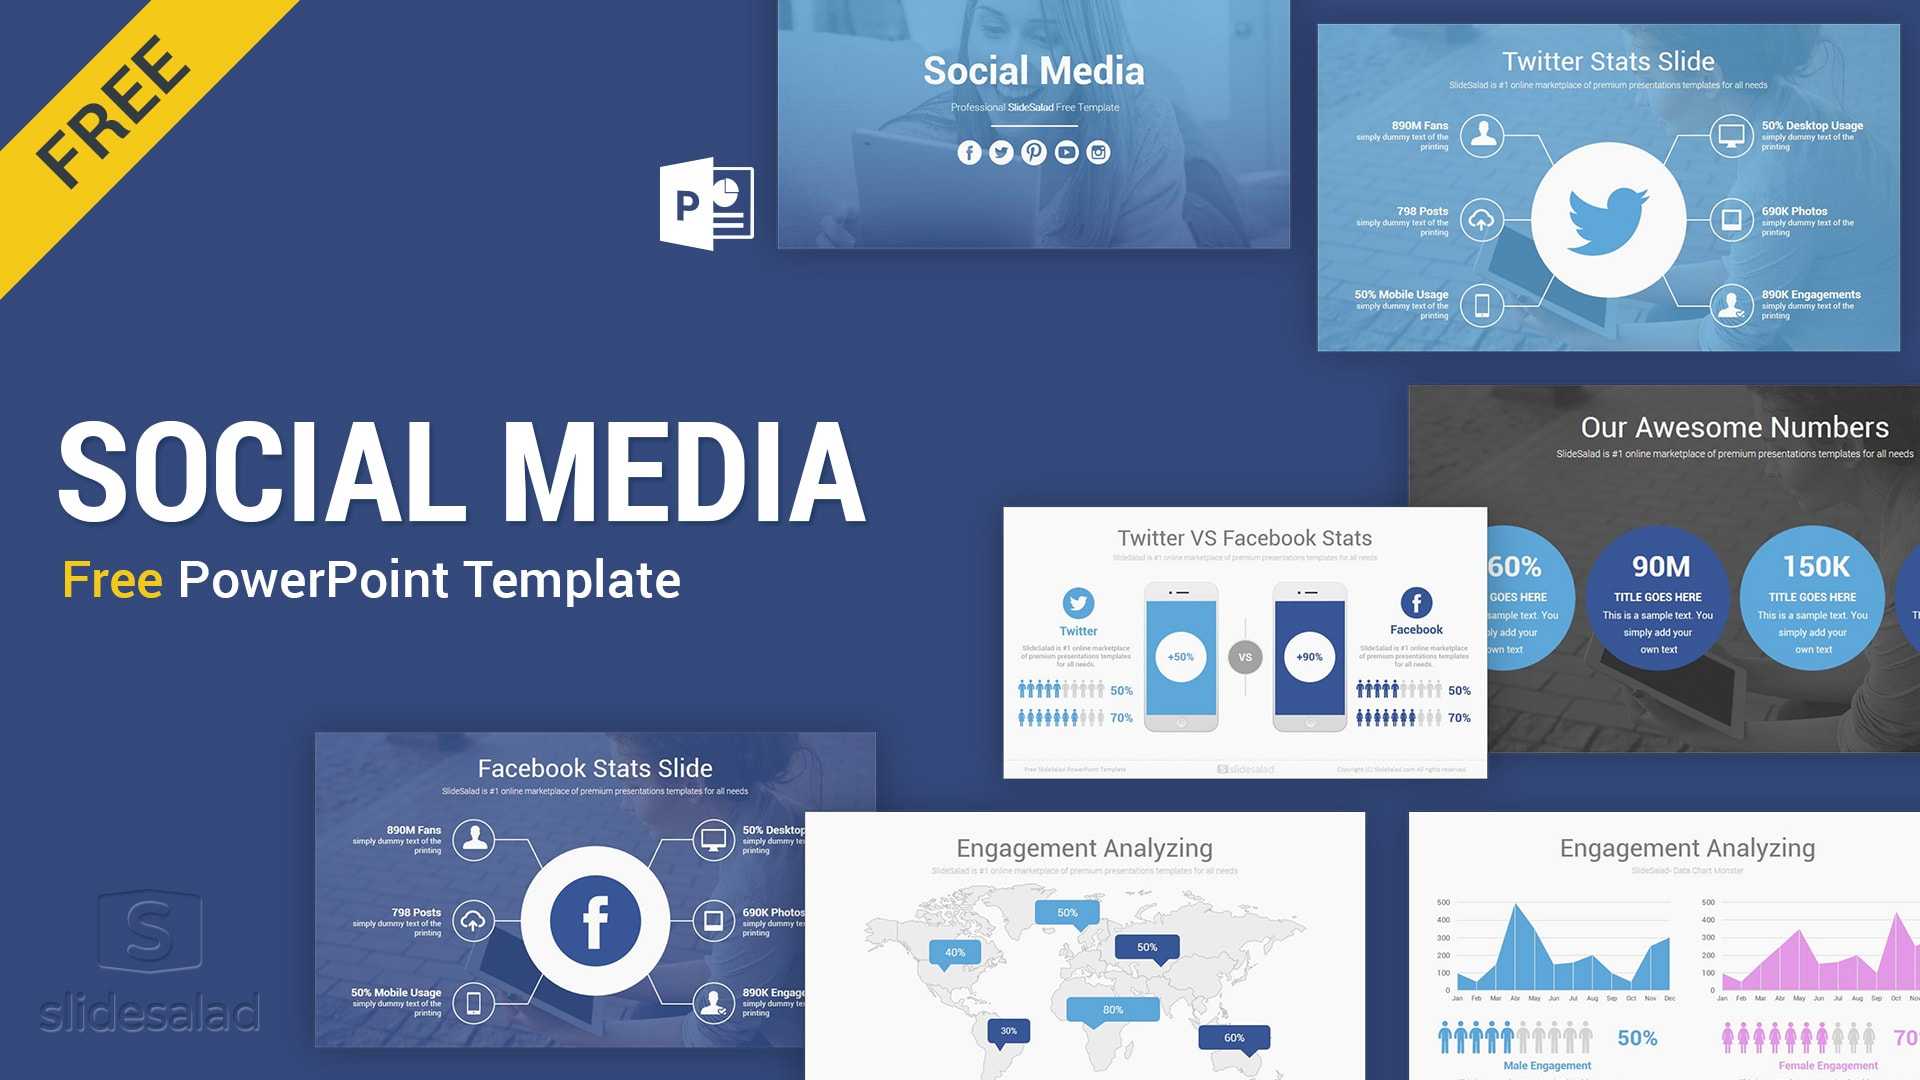 Social Media Free Powerpoint Template Ppt Slides – Slidesalad Within Biography Powerpoint Template